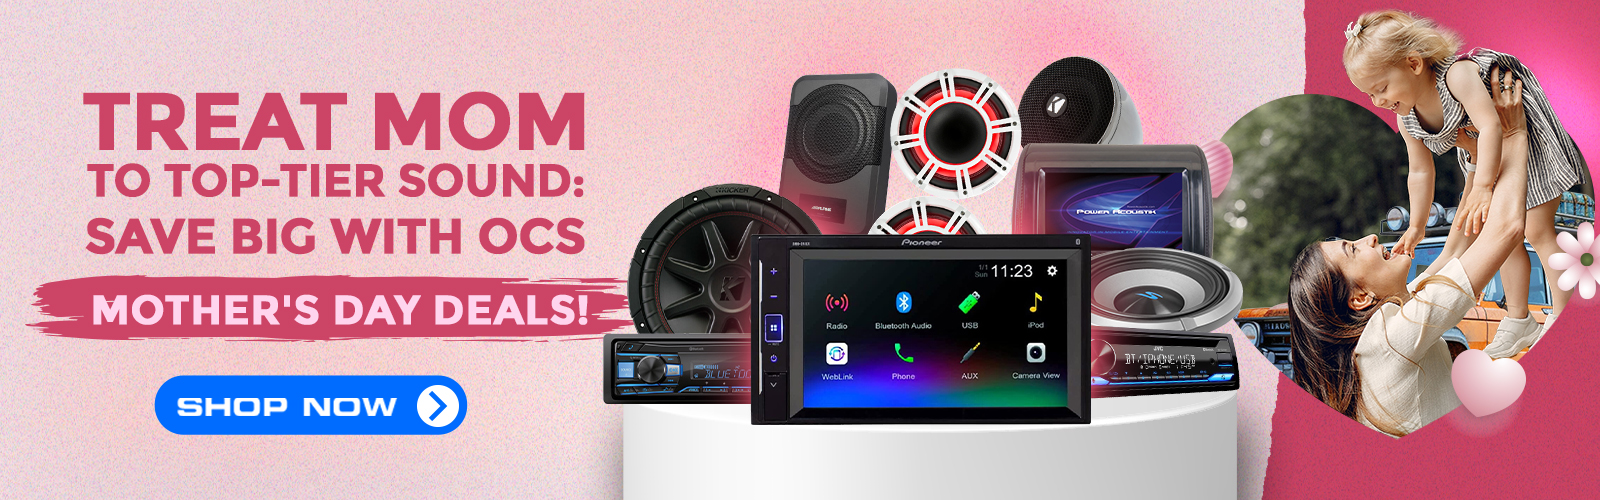 Treat Mom To Top-Tier Sound: Save Big With OCS Mother's Day Deals!